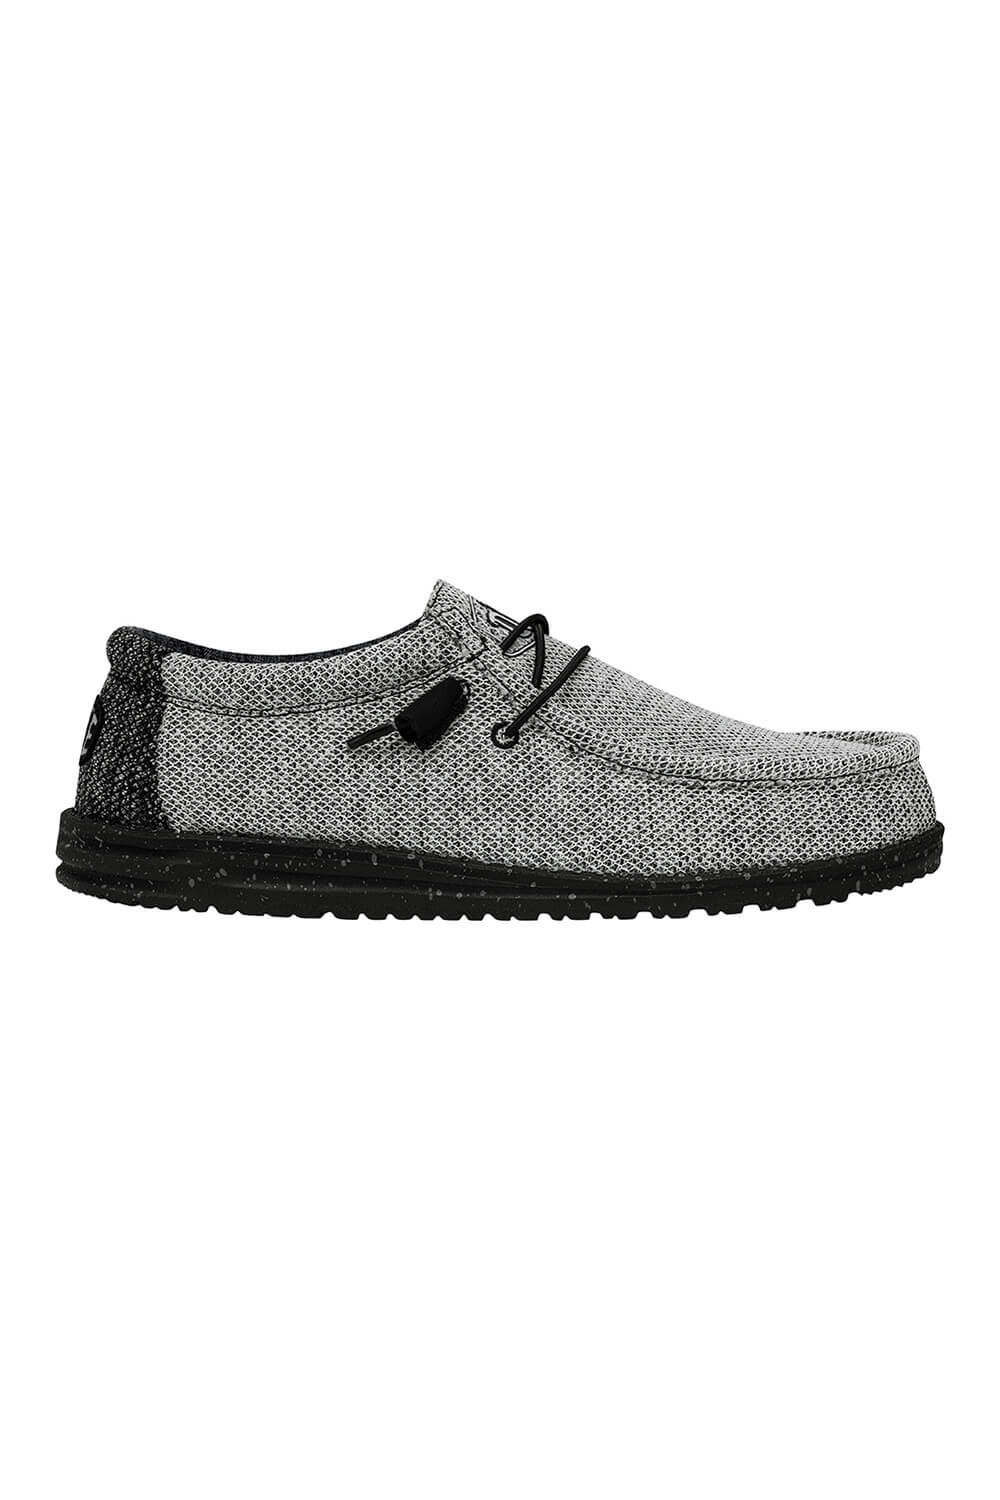 HEYDUDE Men's Wally Stretch Poly Shoes in Dark Web